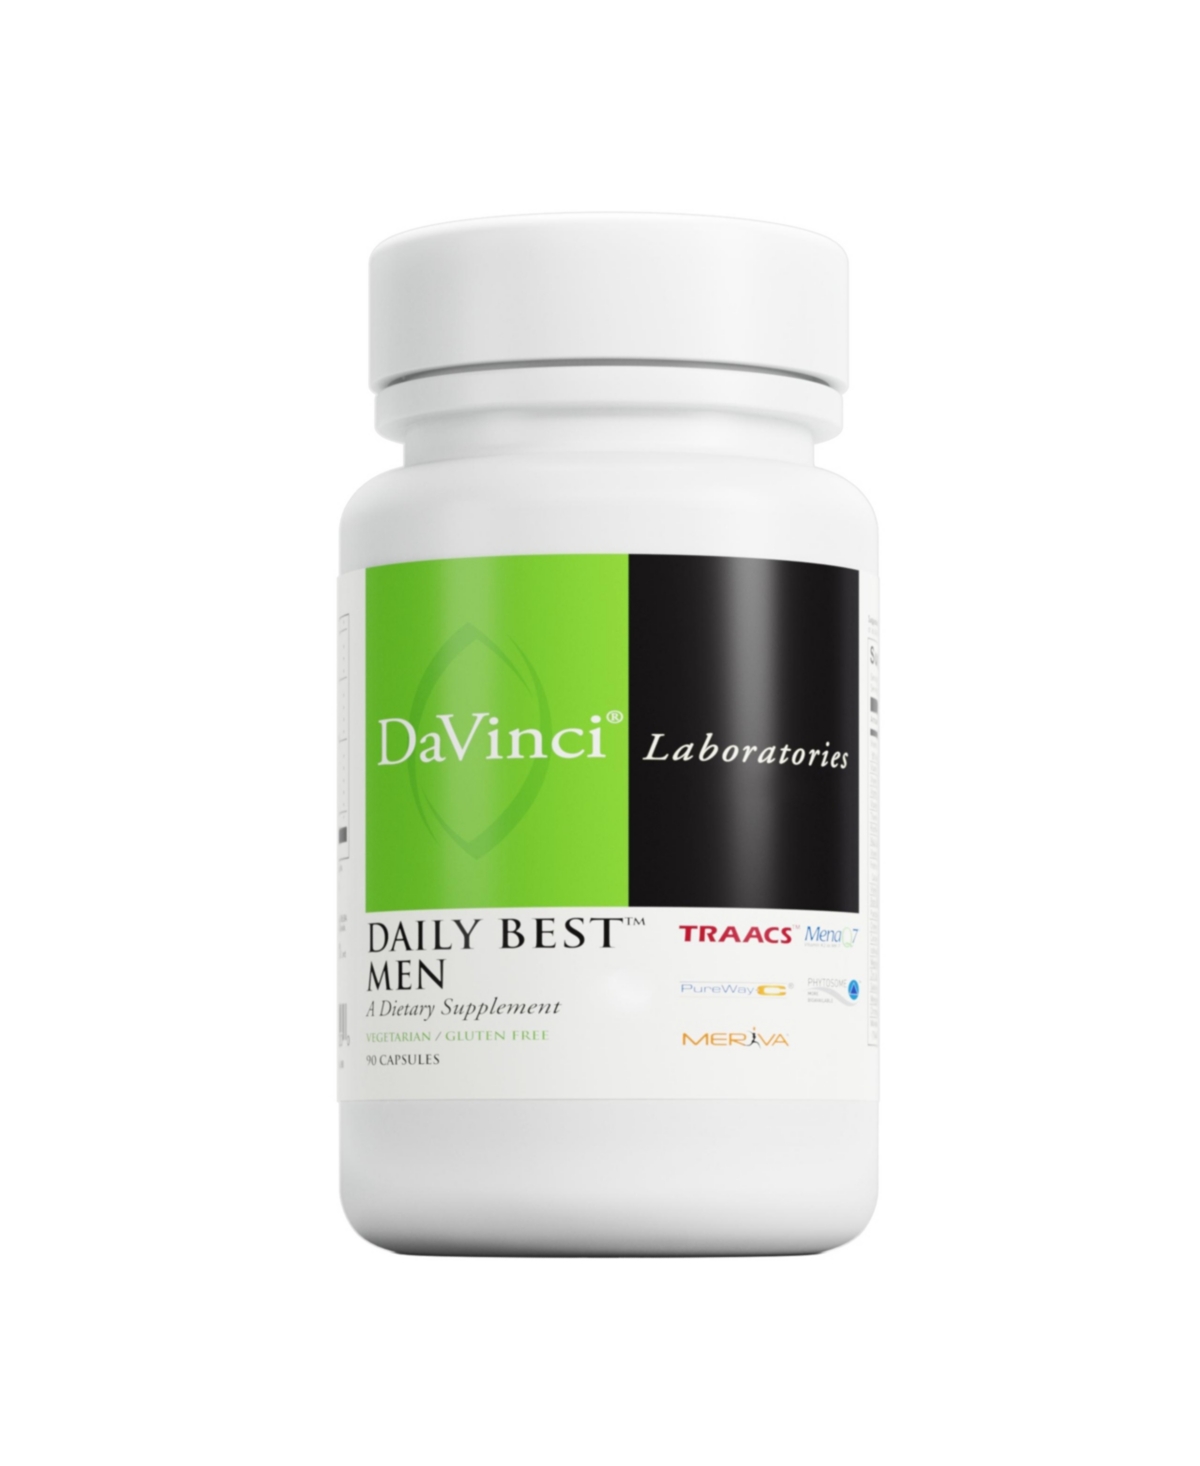 DaVinci Labs - Daily Best Men - A Dietary Supplement with VitaminÂ B6, Vitamin B12 Vitamin C, Vitamin K2, and More - Vegetarian,